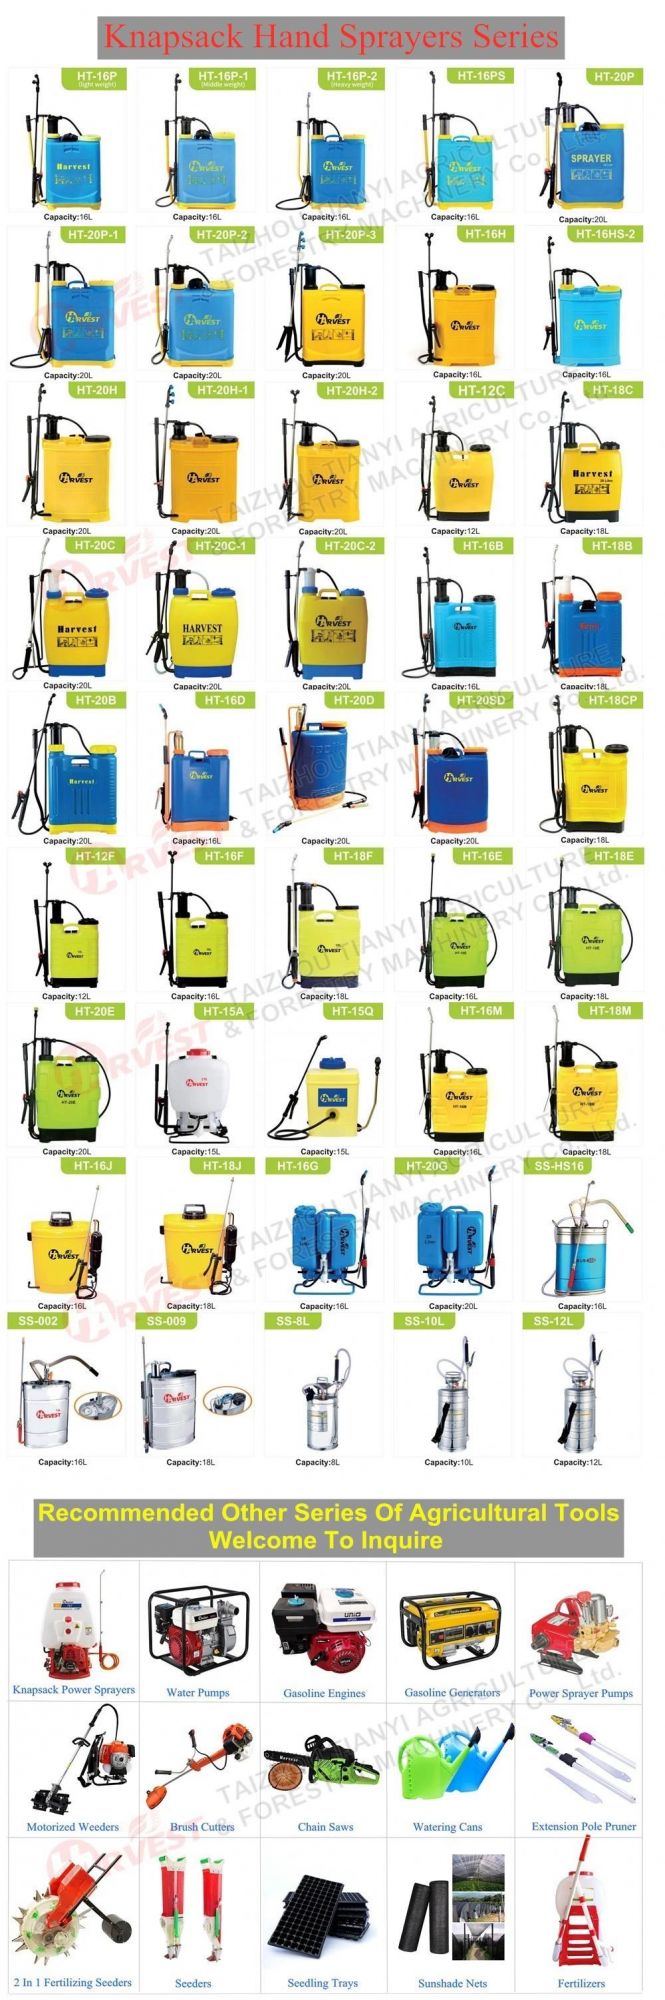 Quality Malaysia Style Agricultural Knapsack Backpack Hand Sprayer (HT-16J)